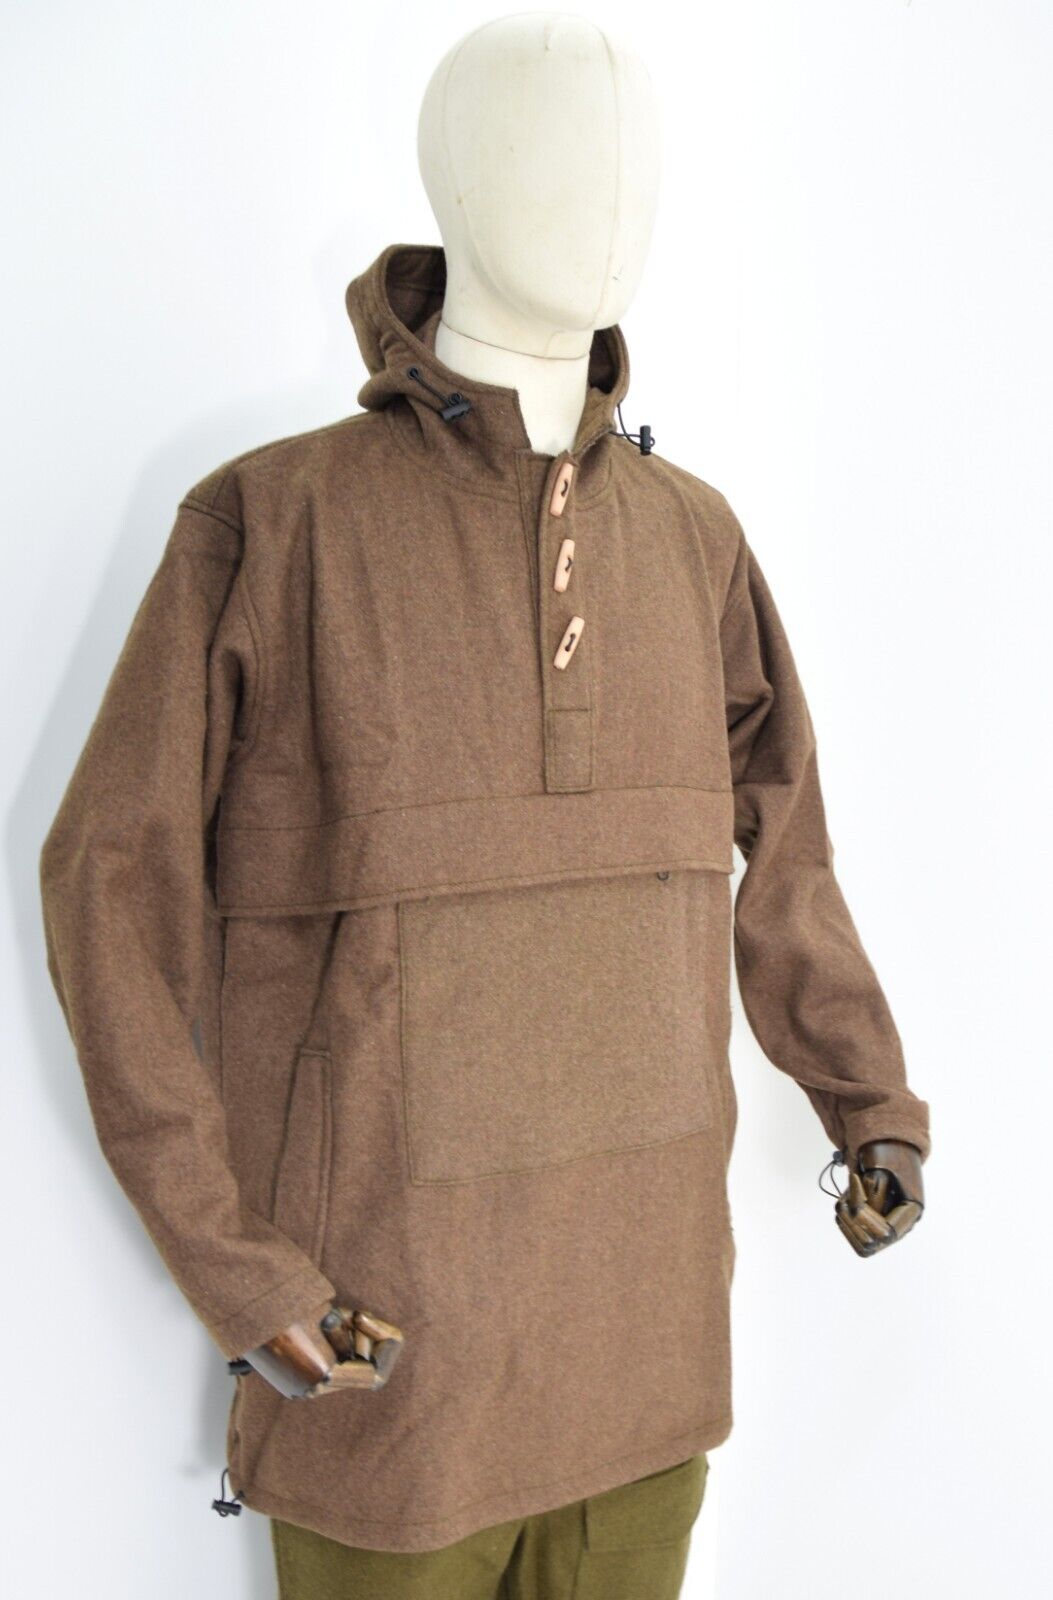 Bushcraft Anorak Smock Made From Wool Type Army Military Surplus Blanket Outdoor